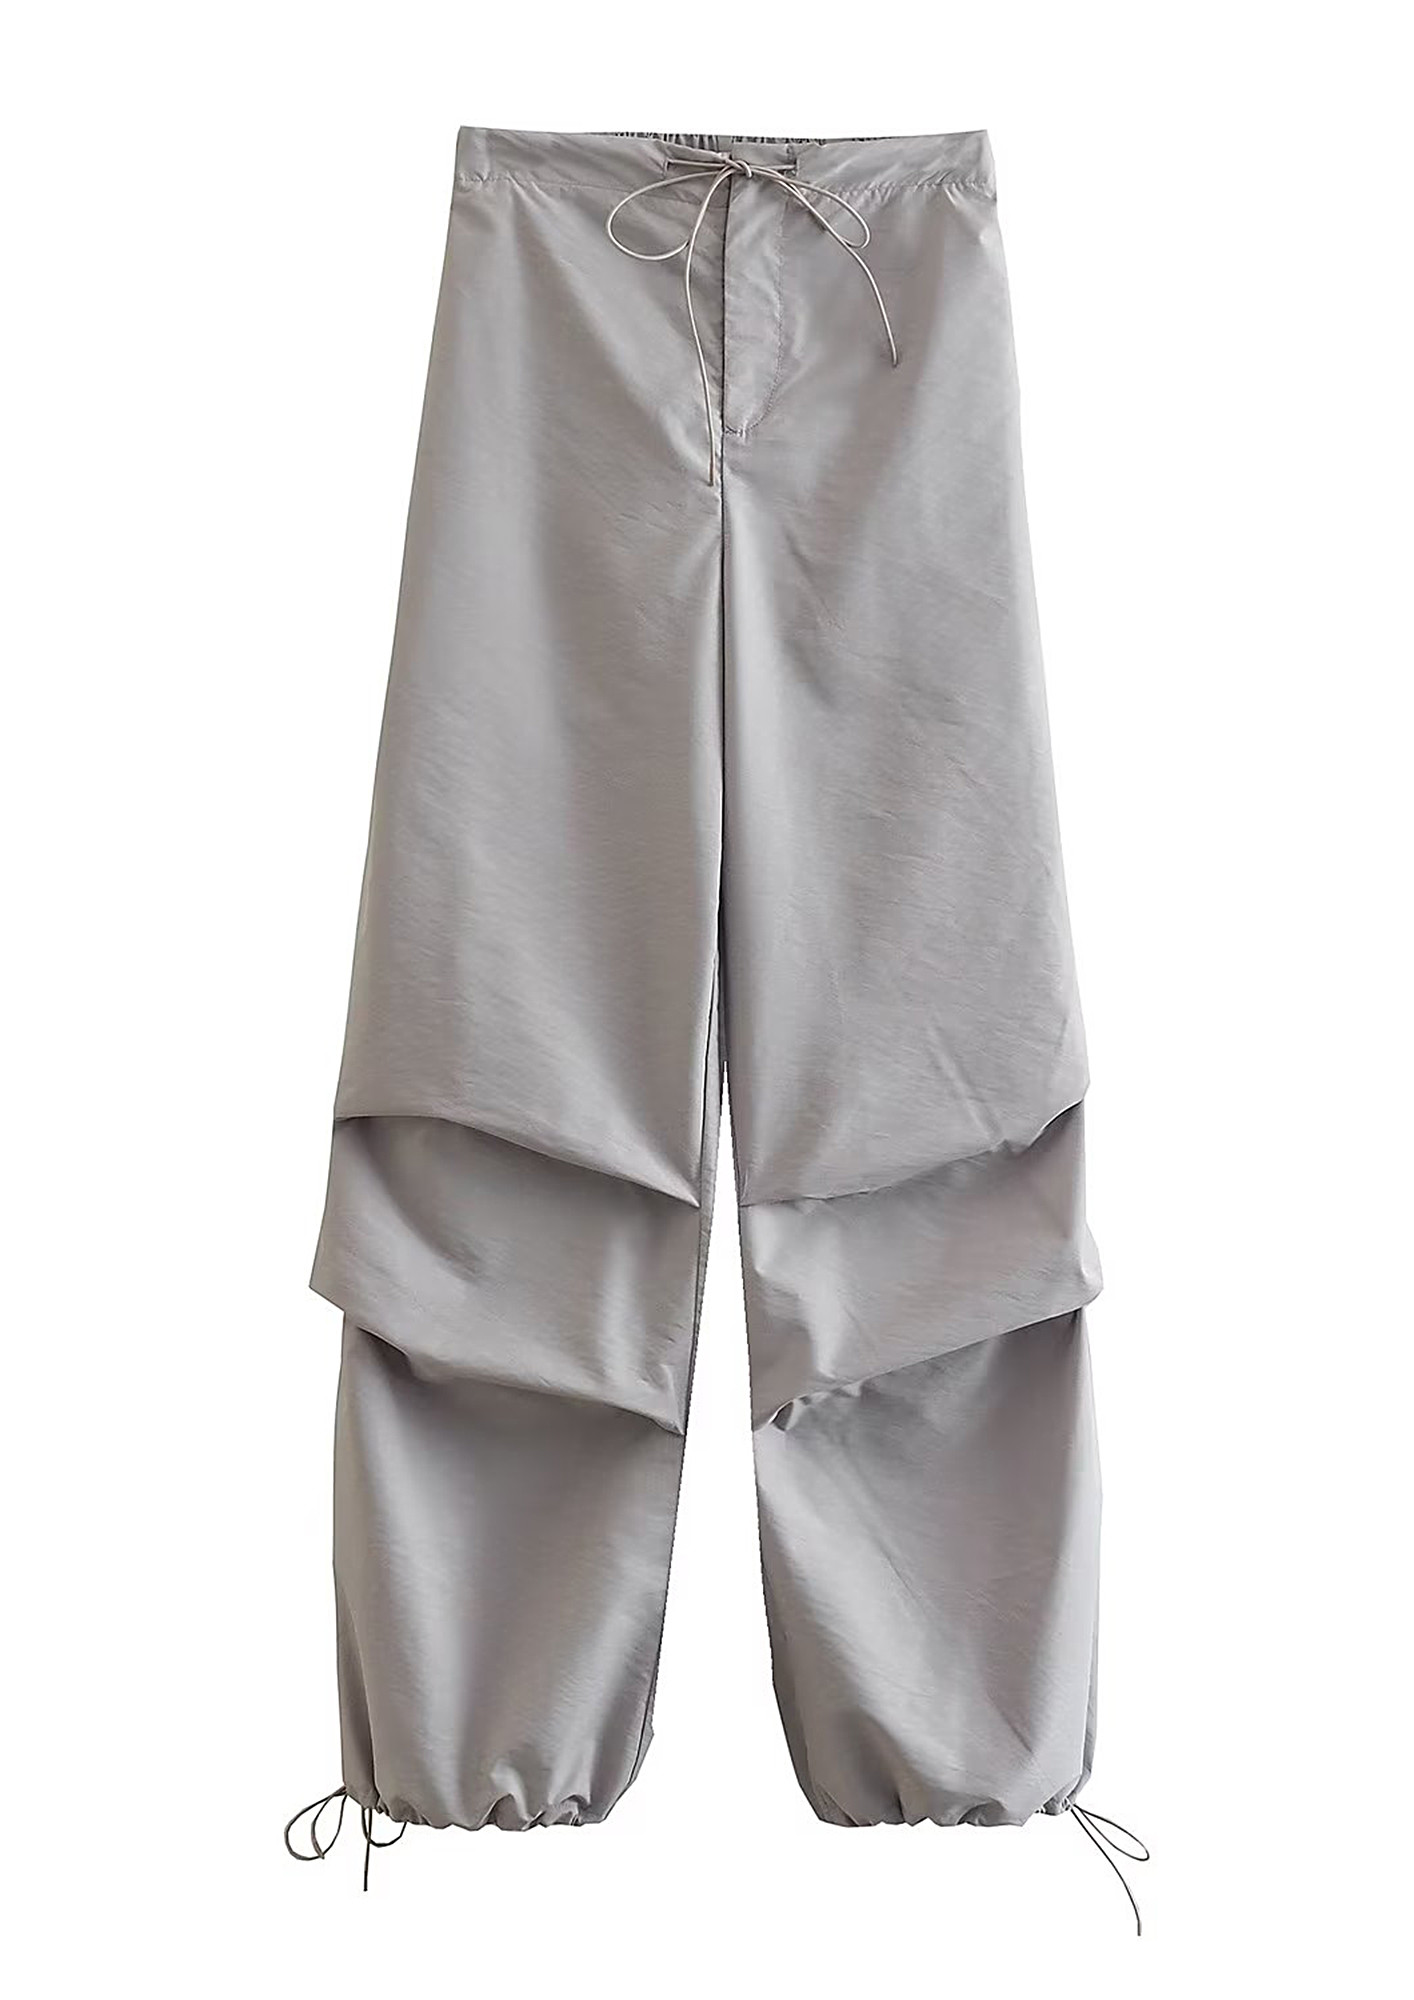 Buy HIGH-WAIST WHITE PARACHUTE PANTS for Women Online in India